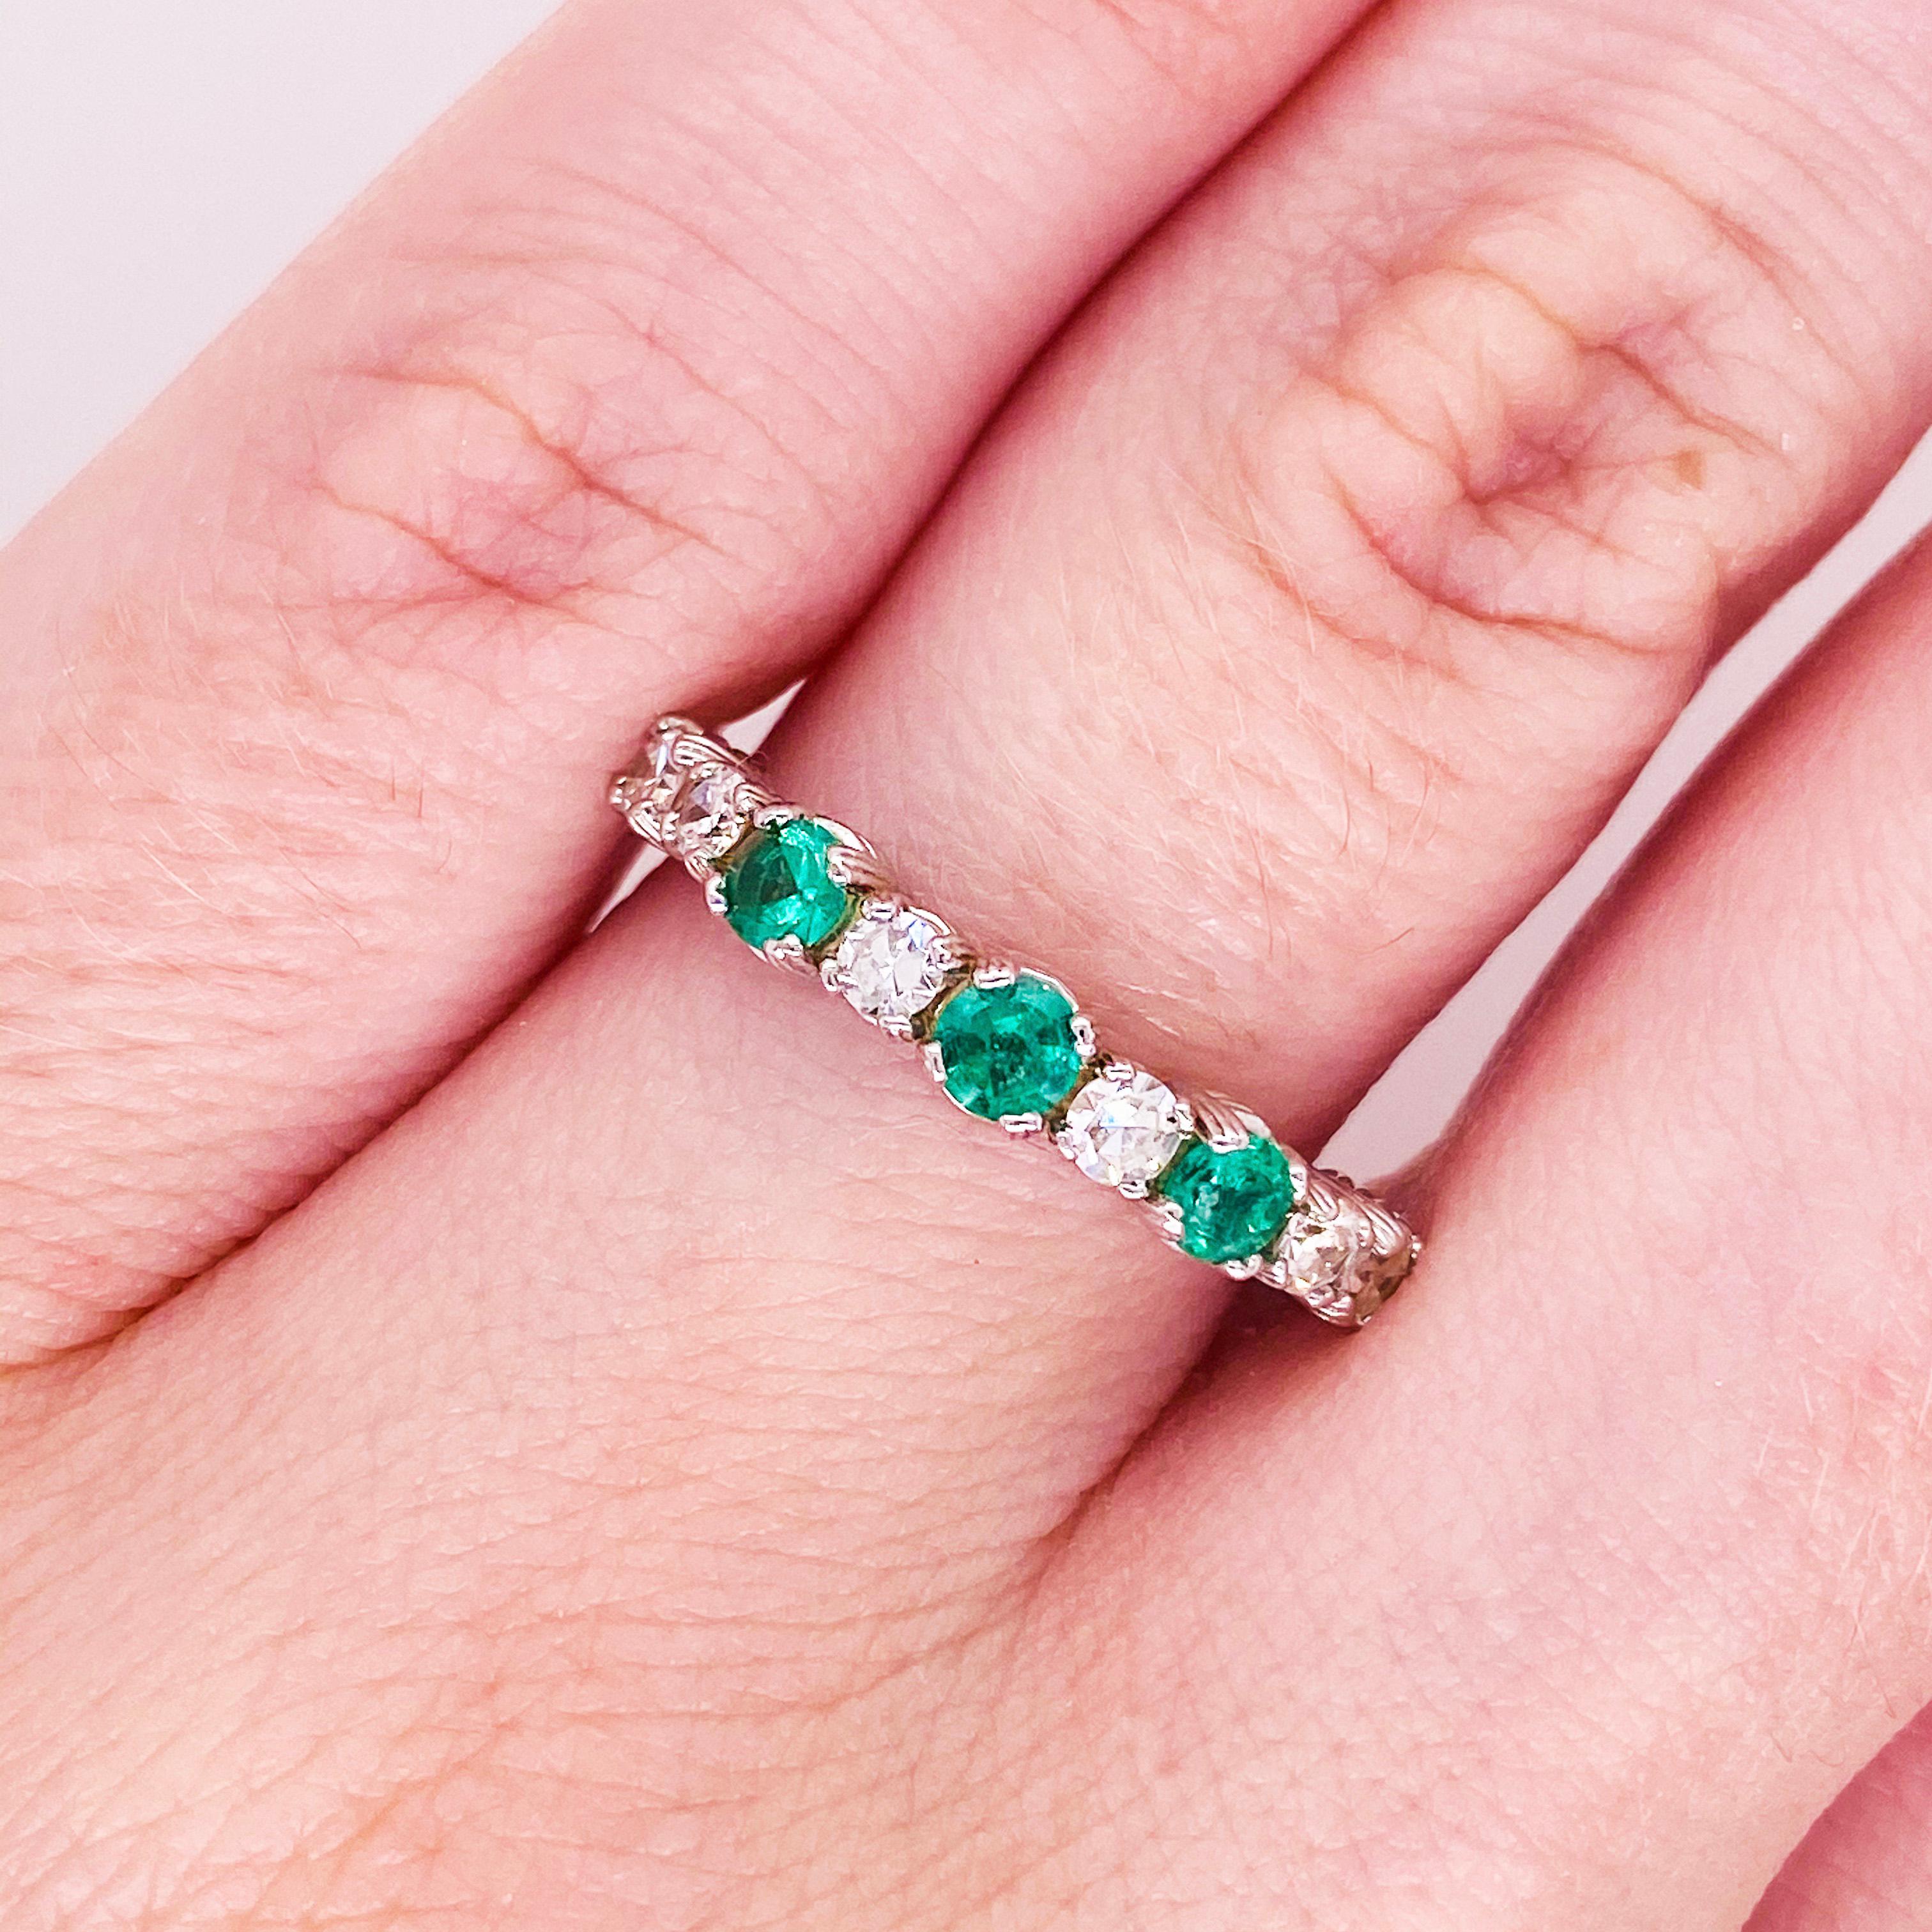 Vibrant emeralds and bright white diamonds have never looked better! This emerald and diamond band has genuine, natural emerald gemstones set in between bright white diamonds. The stones are set in an 18 karat white gold band that is a strong and